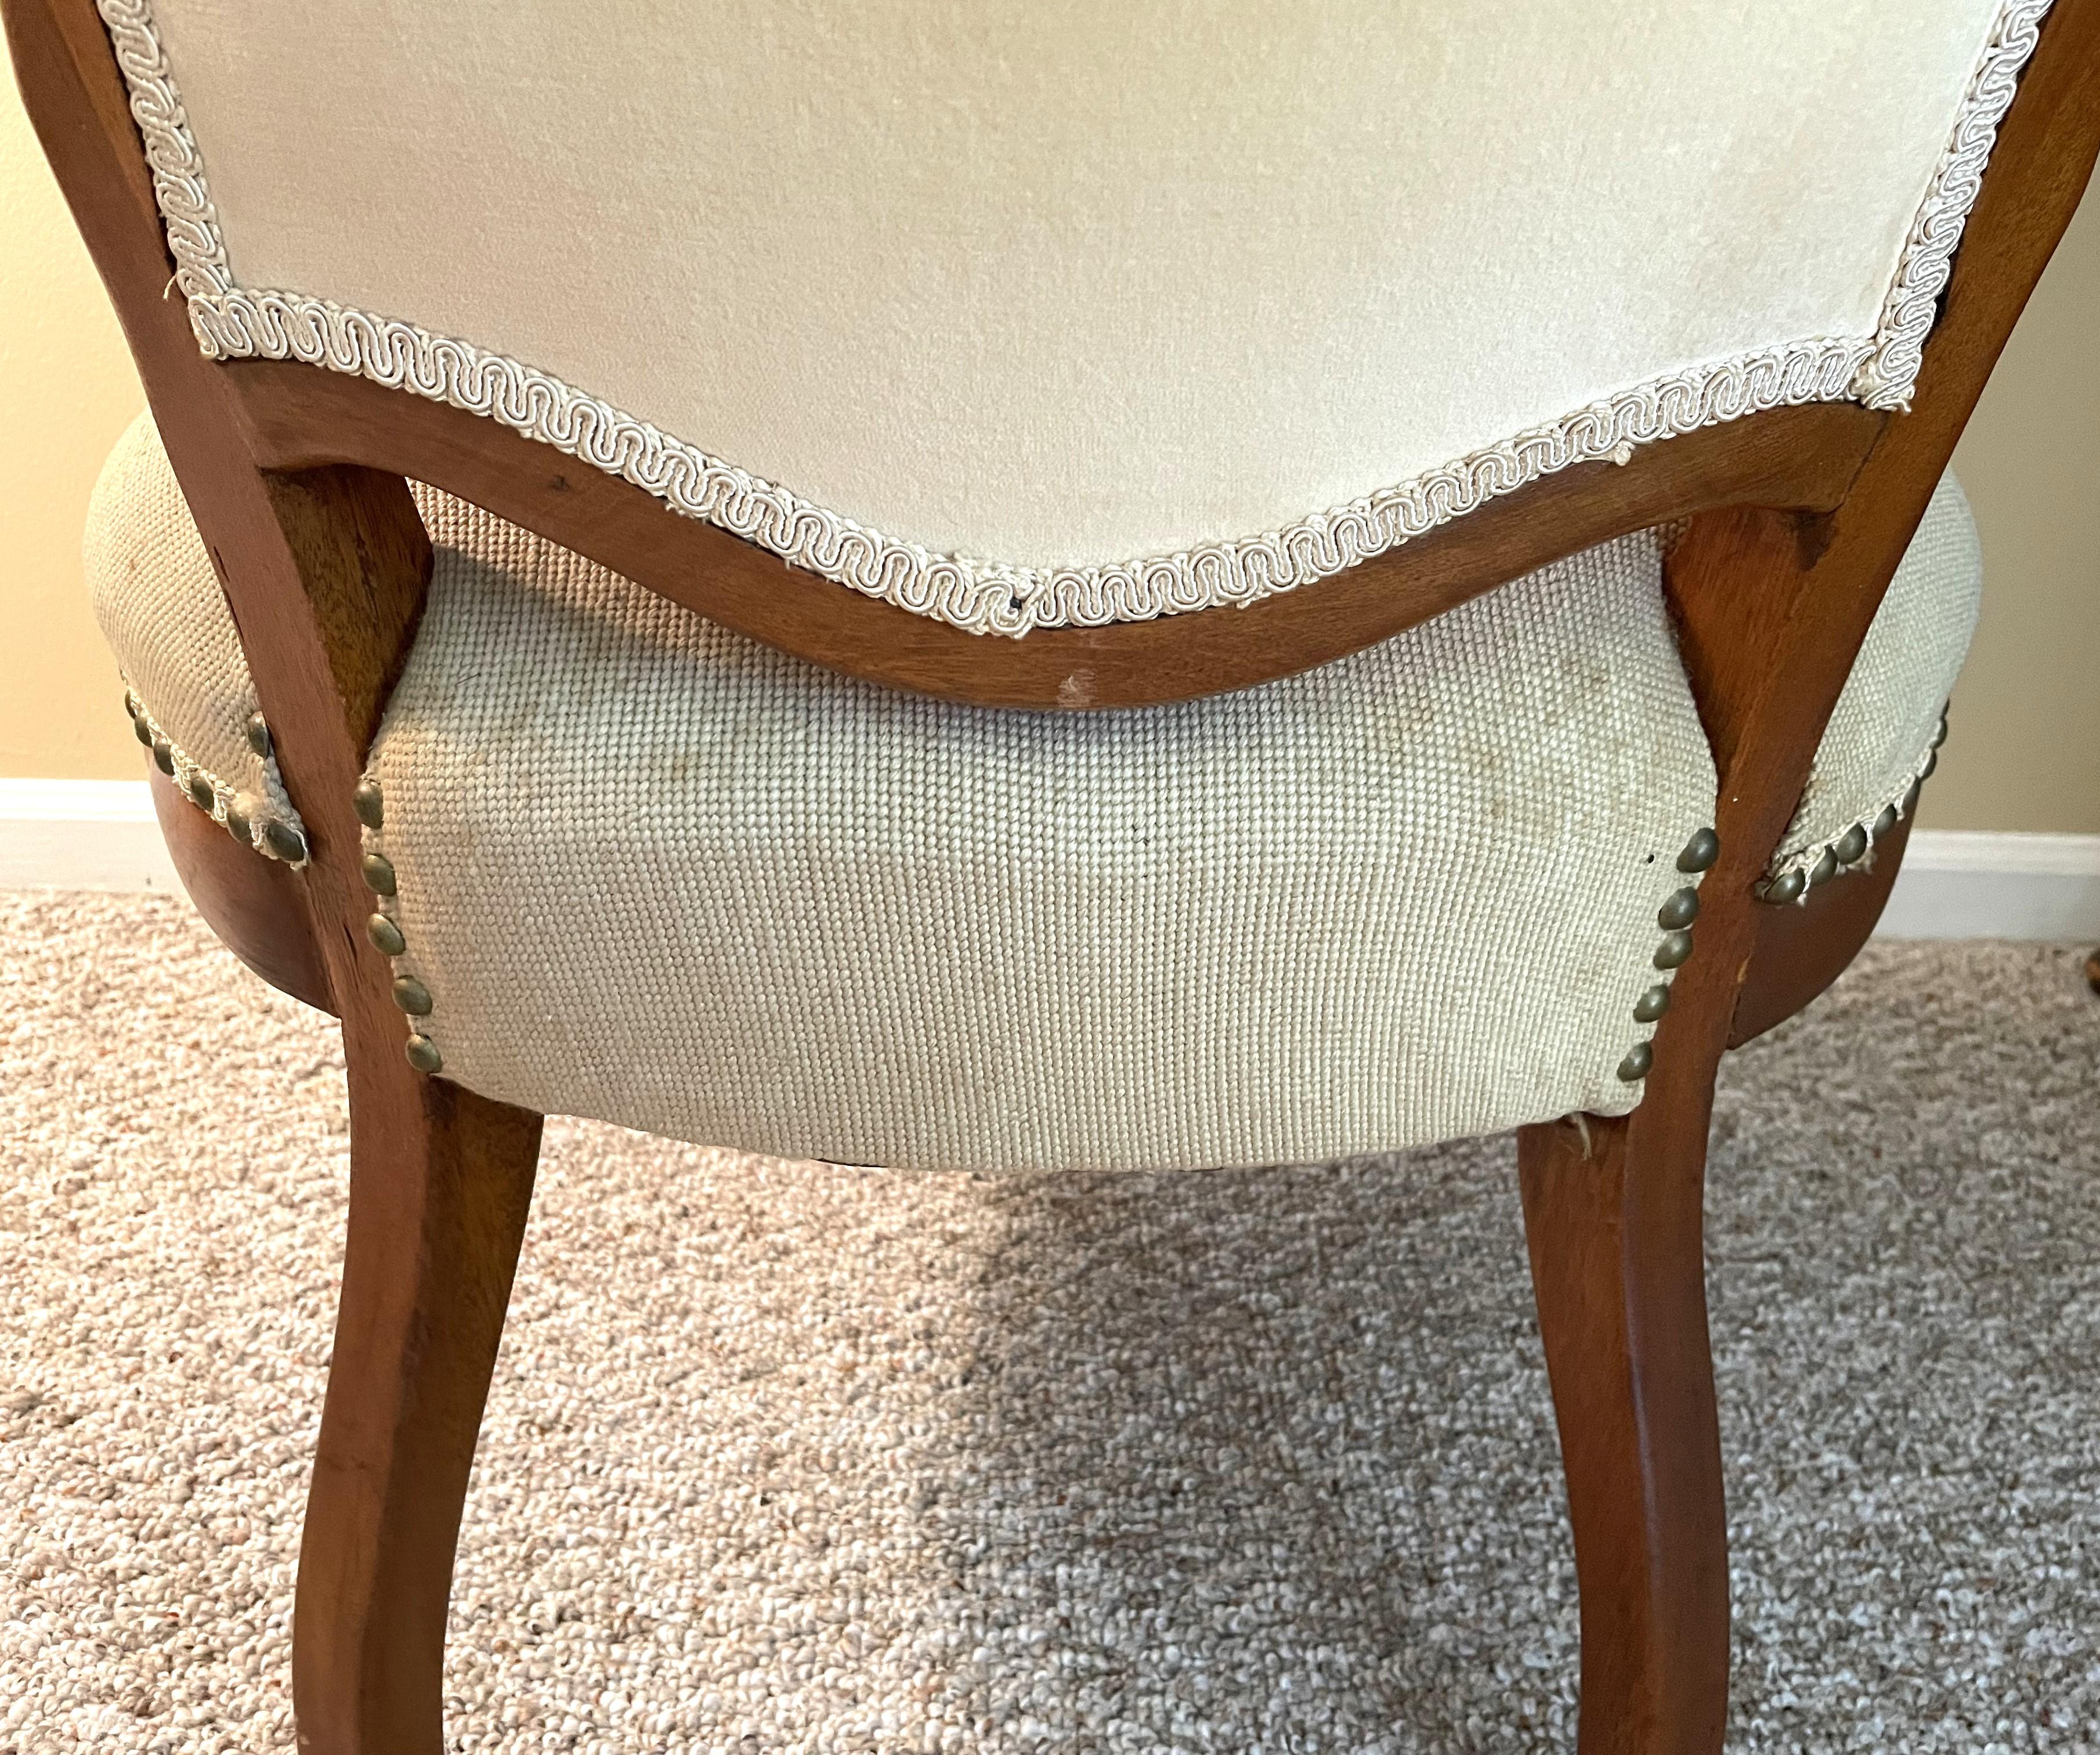 1920s French Walnut Accent Chair with Needlepoint Upholstery For Sale 2